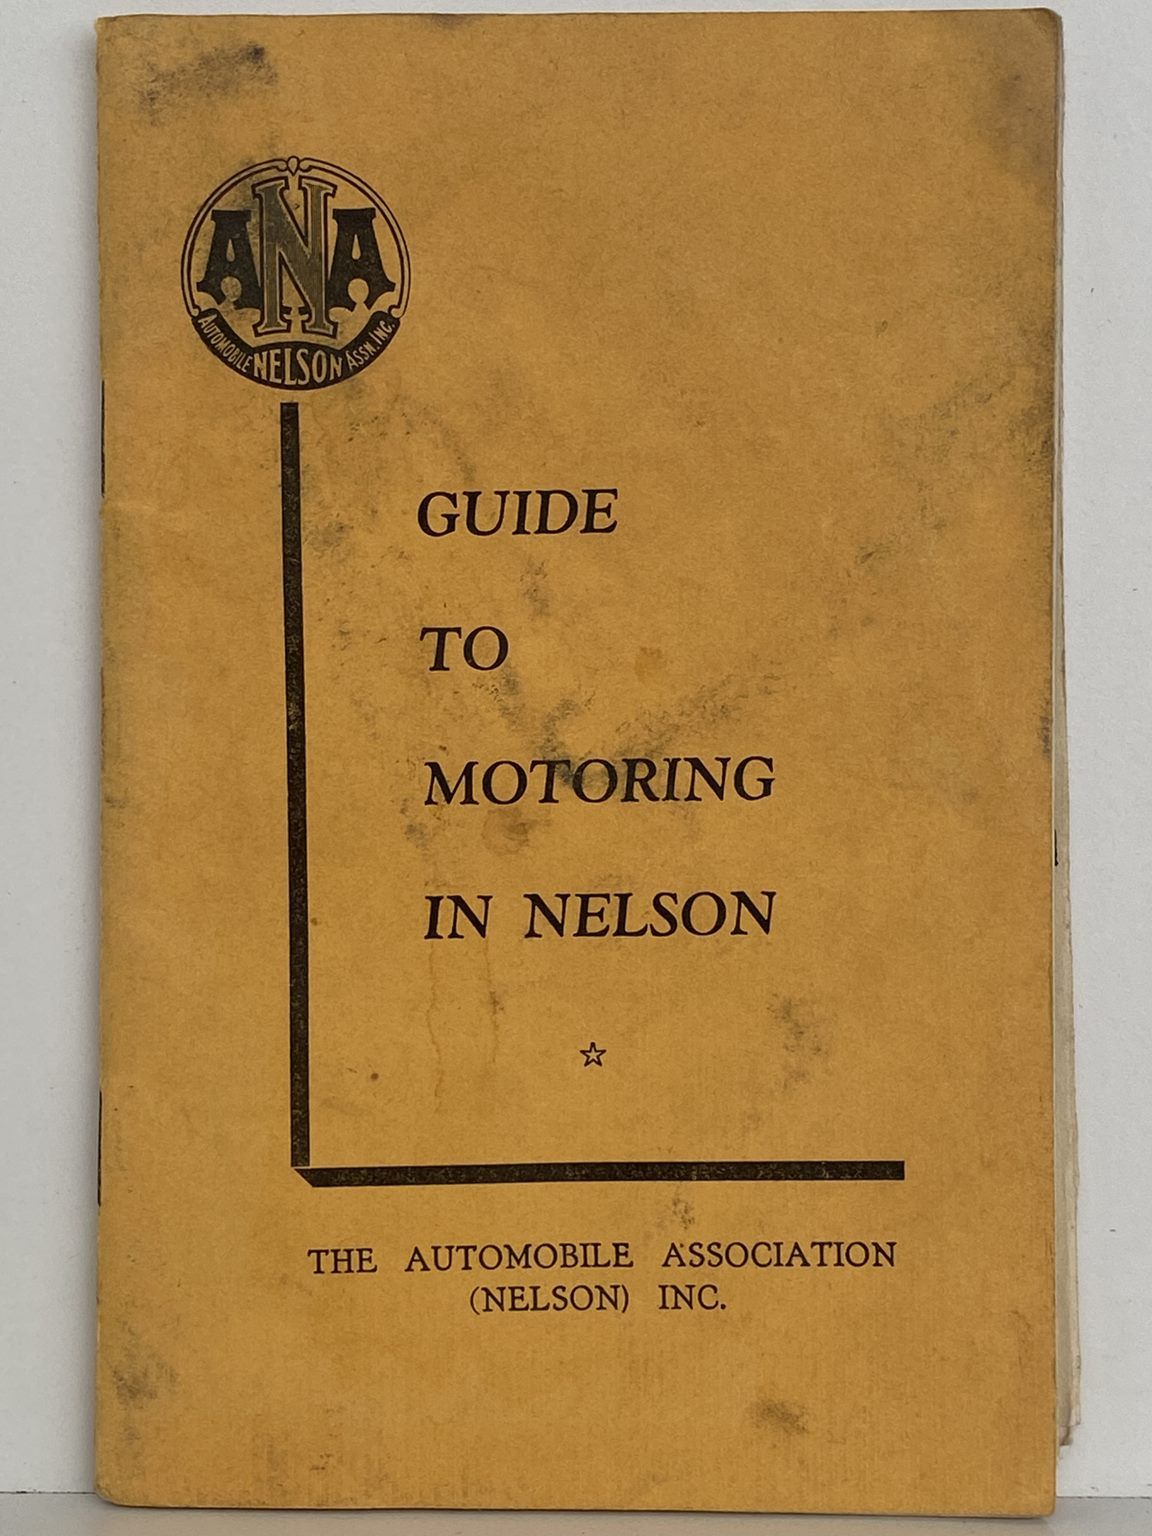 Automobile Association GUIDE TO MOTORING IN NELSON